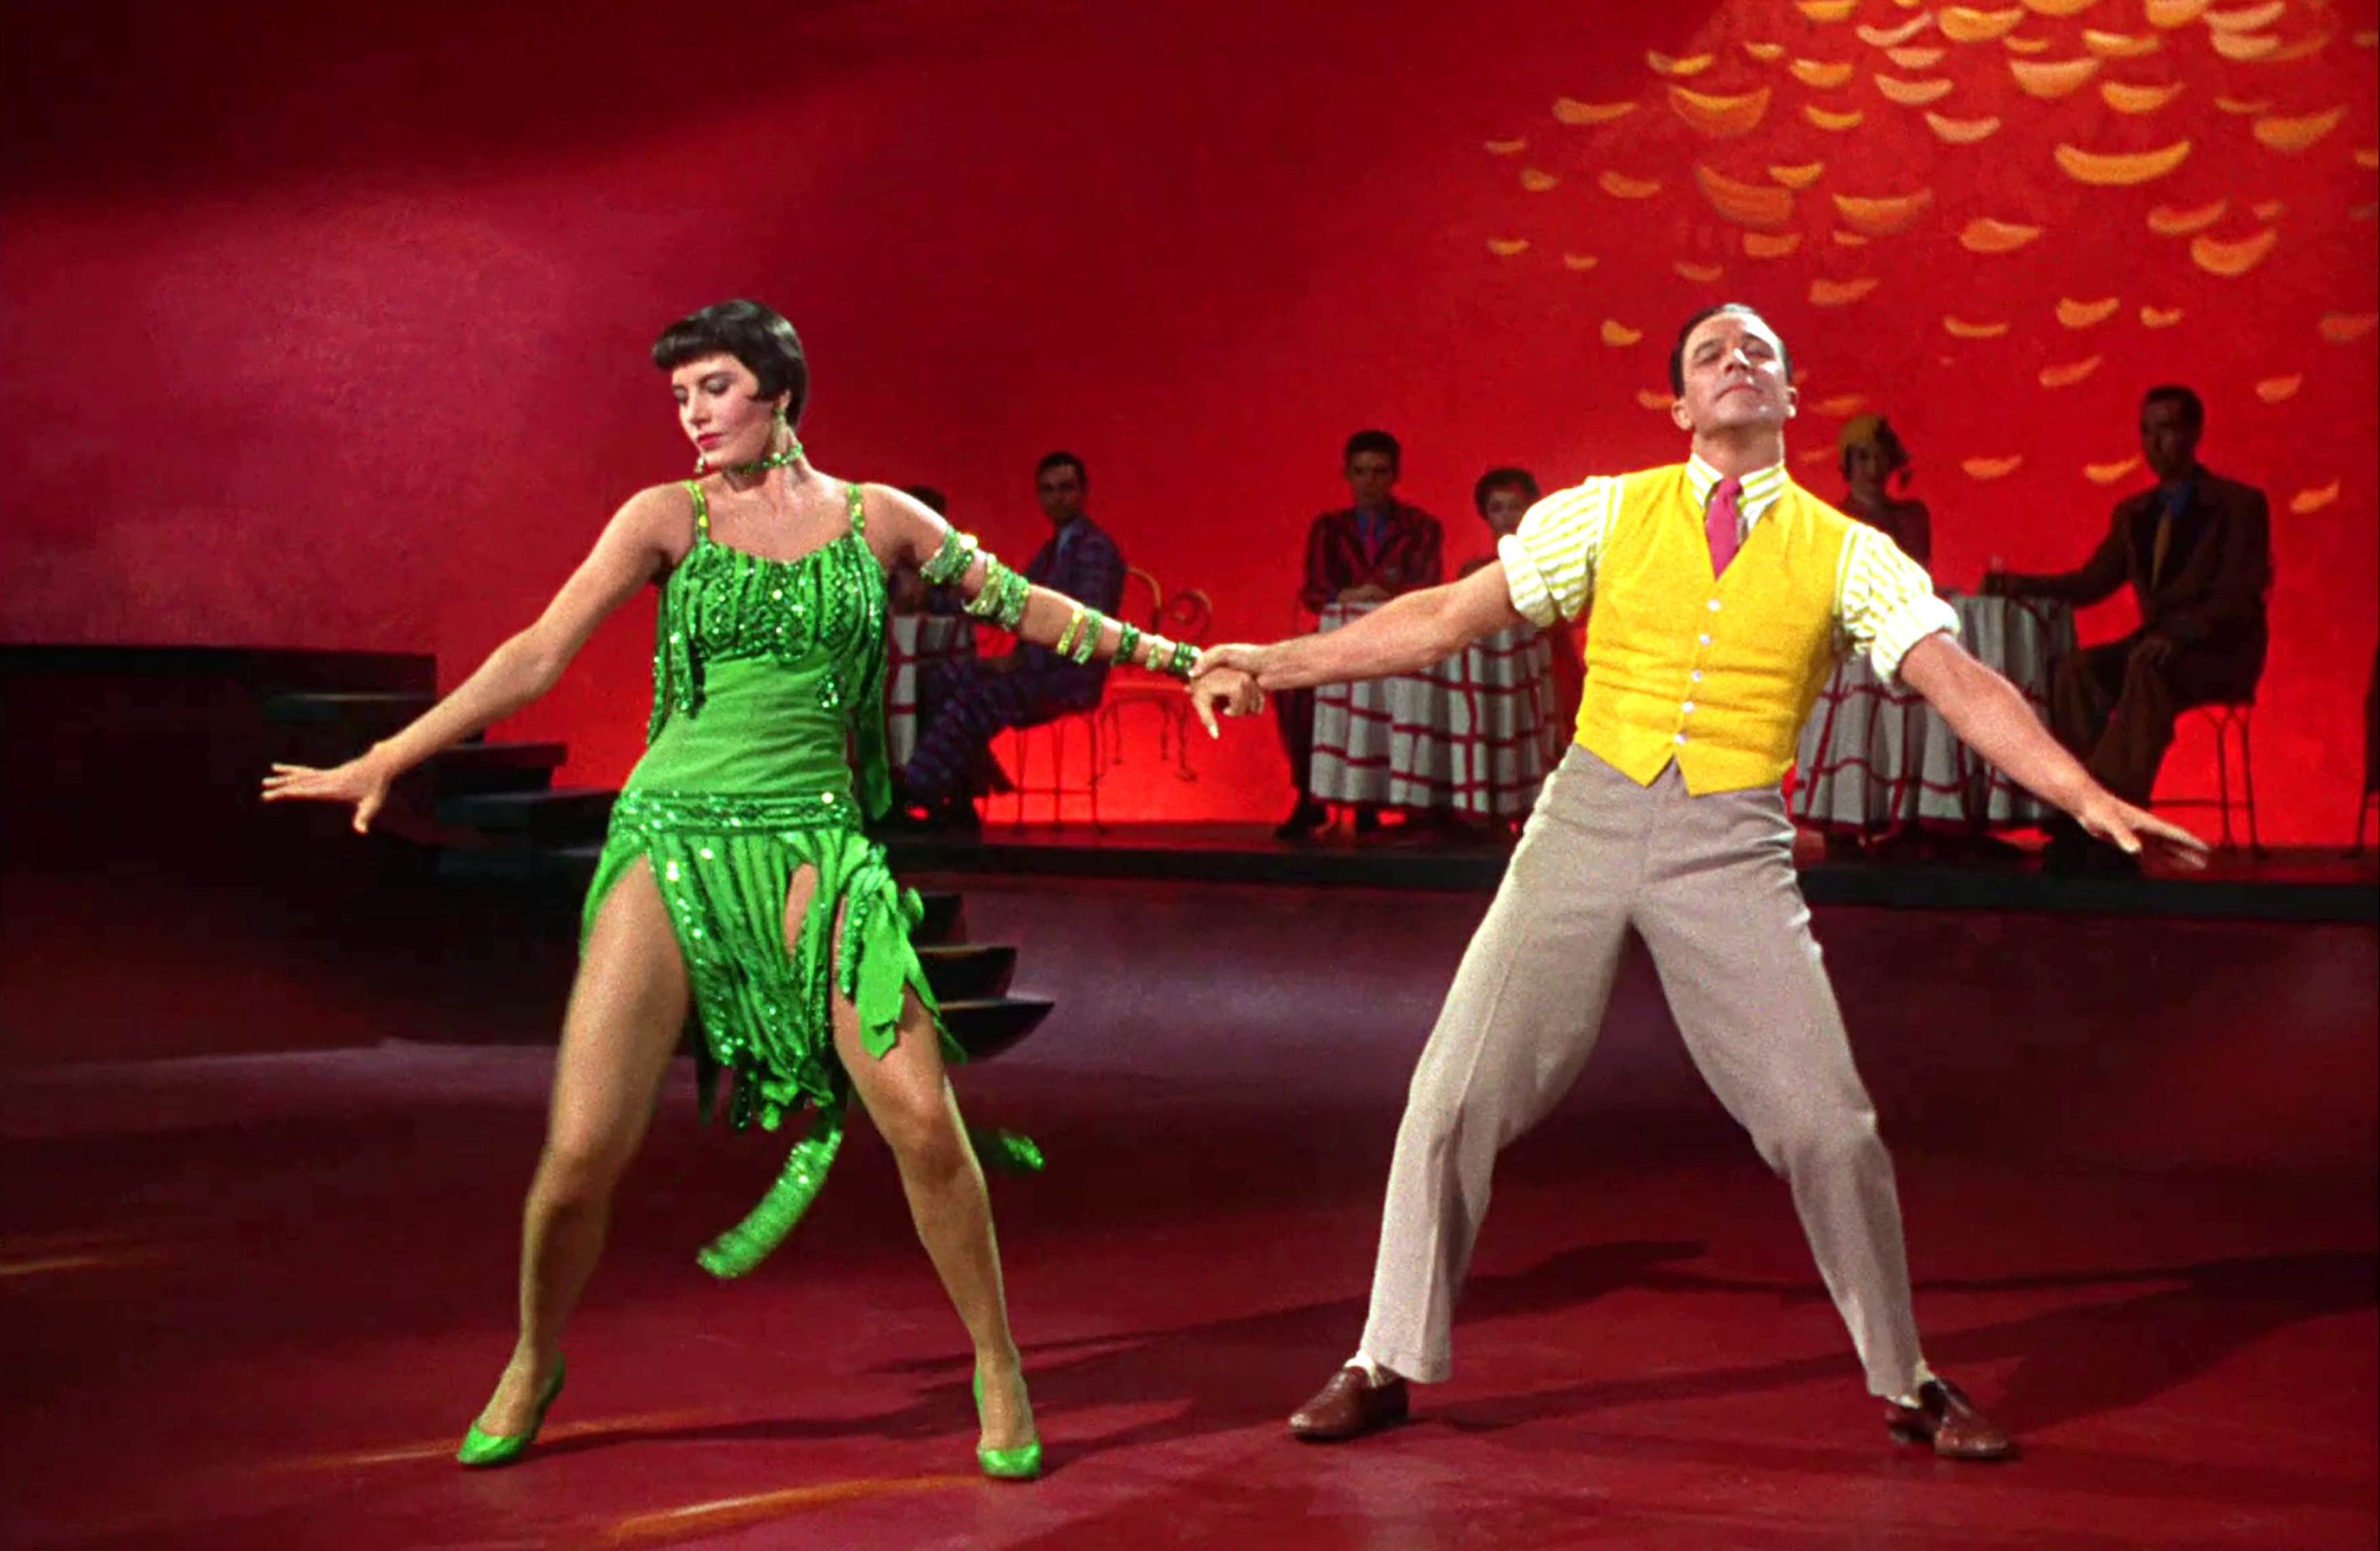 Singing In The Rain S Enduring Greatness Lies In Its Proud Vulgarity